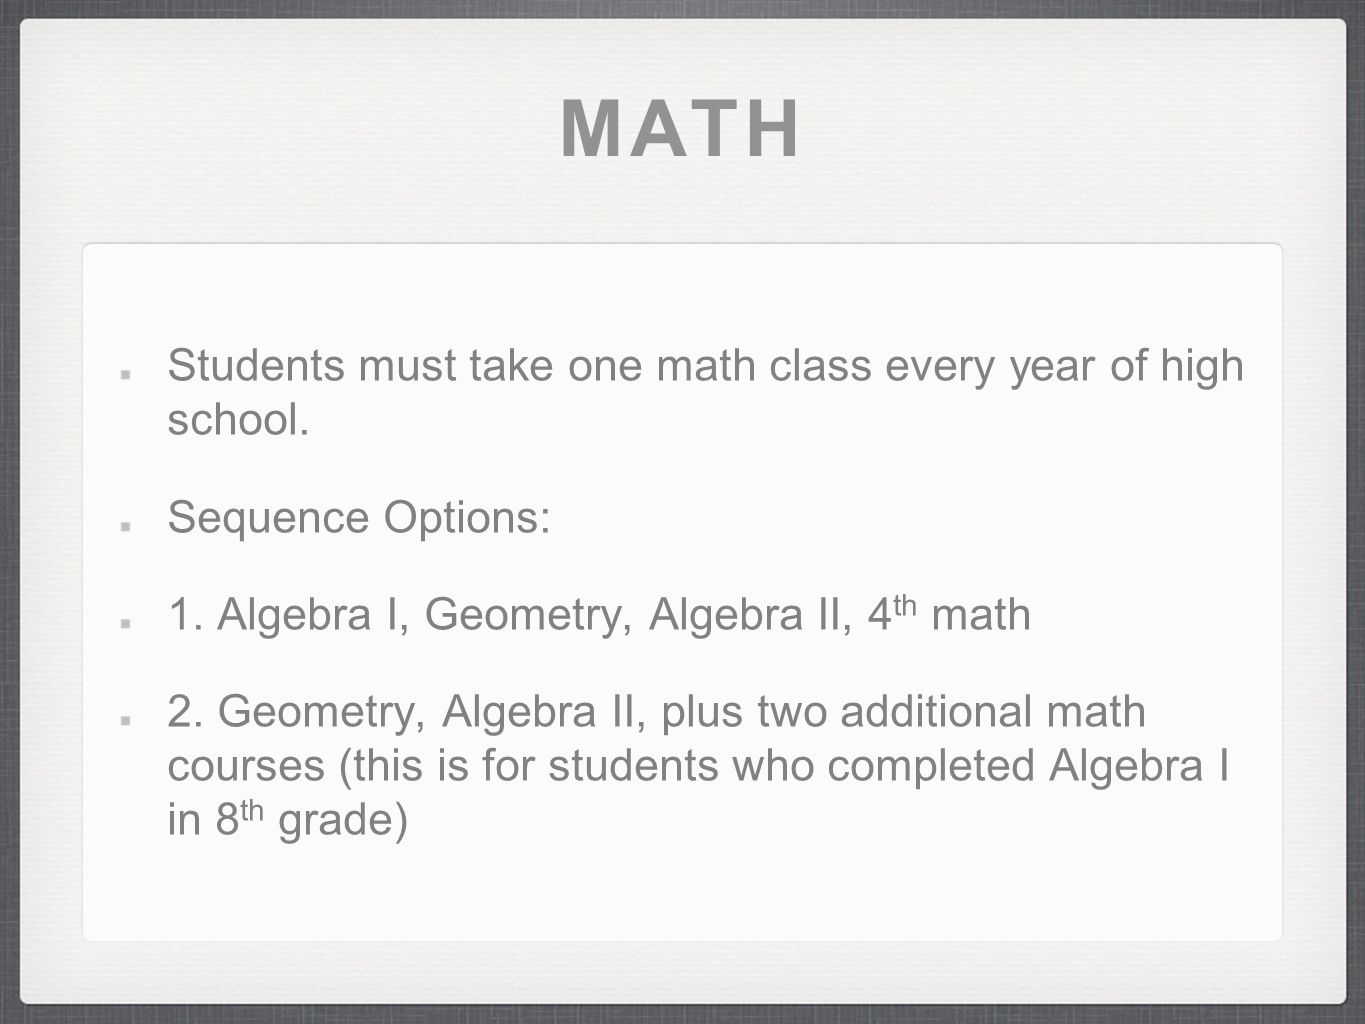 MATH Students must take one math class every year of high school.